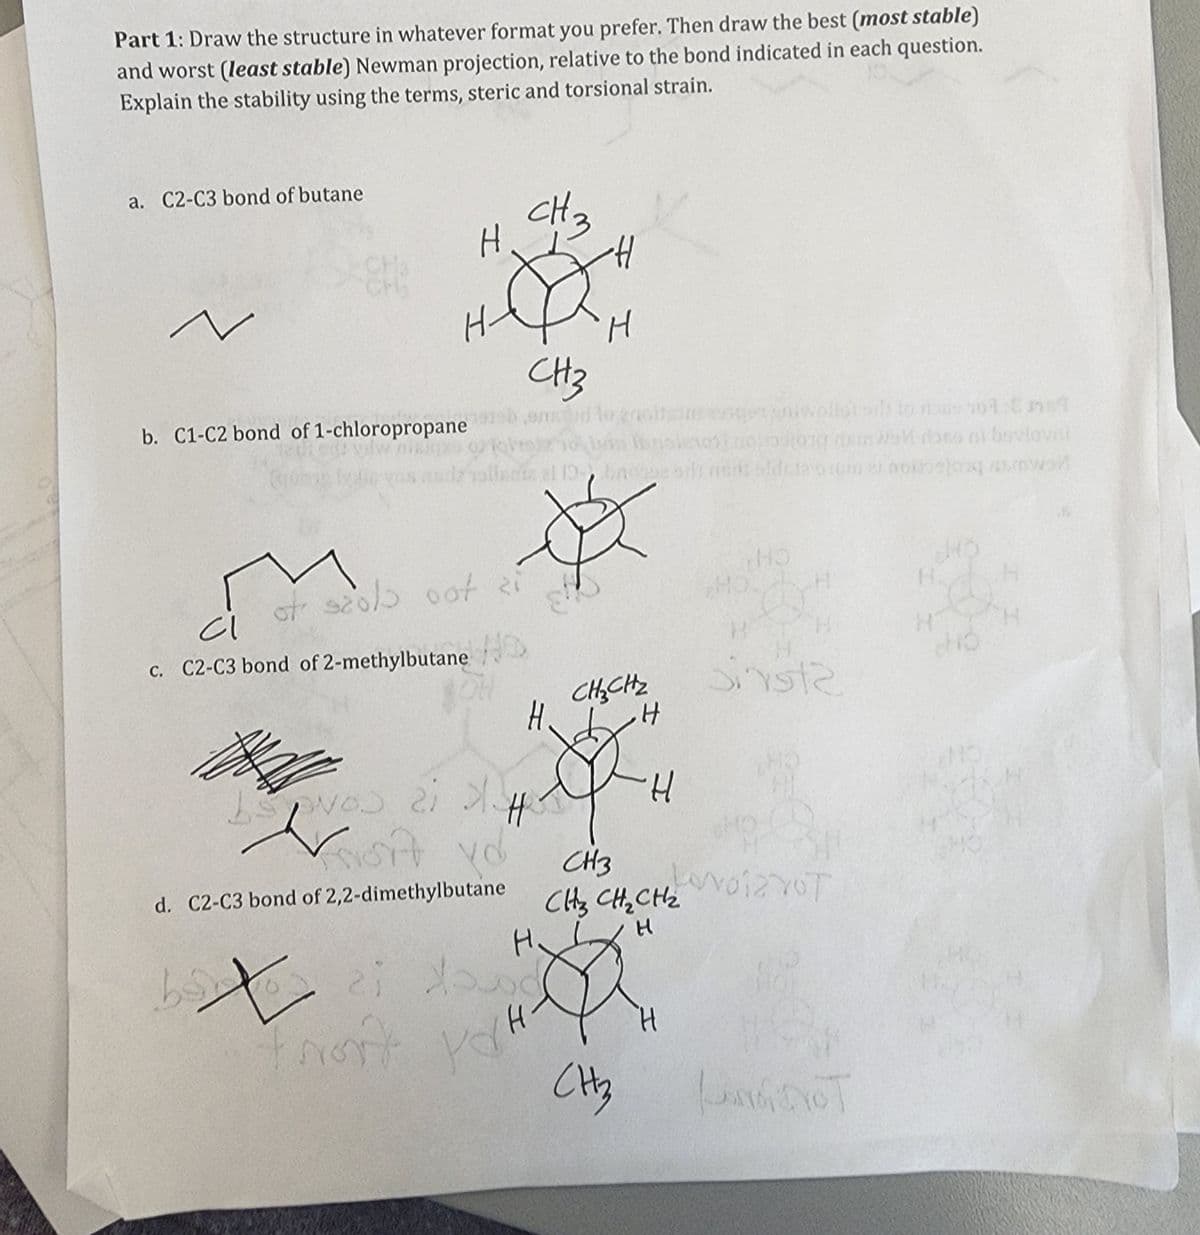 Part 1: Draw the structure in whatever format you prefer. Then draw the best (most stable)
and worst (least stable) Newman projection, relative to the bond indicated in each question.
Explain the stability using the terms, steric and torsional strain.
a. C2-C3 bond of butane
¿
H-
b. C1-C2 bond of 1-chloropropane
H
of scold oot zi
WD
CI
c. C2-C3 bond of 2-methylbutane
vos ai 3.
Fort yd
d. C2-C3 bond of 2,2-dimethylbutane
CH 3
CH3
ontud to groitsinse
Hansiero
H
H
bx
bo ci down
ron't yo
-H
H
81
Ø
CH₂CH₂
H
CH₂
H
CH3
CH₂ CH₂ CH₂
H
H
wollot sil) to rose 701 Cmst
Well done at bovlovin
ei noiejos 45mwol
HO
HO.
OH
Sinst2
LovoizYOT
LAMENT
H.
H
H